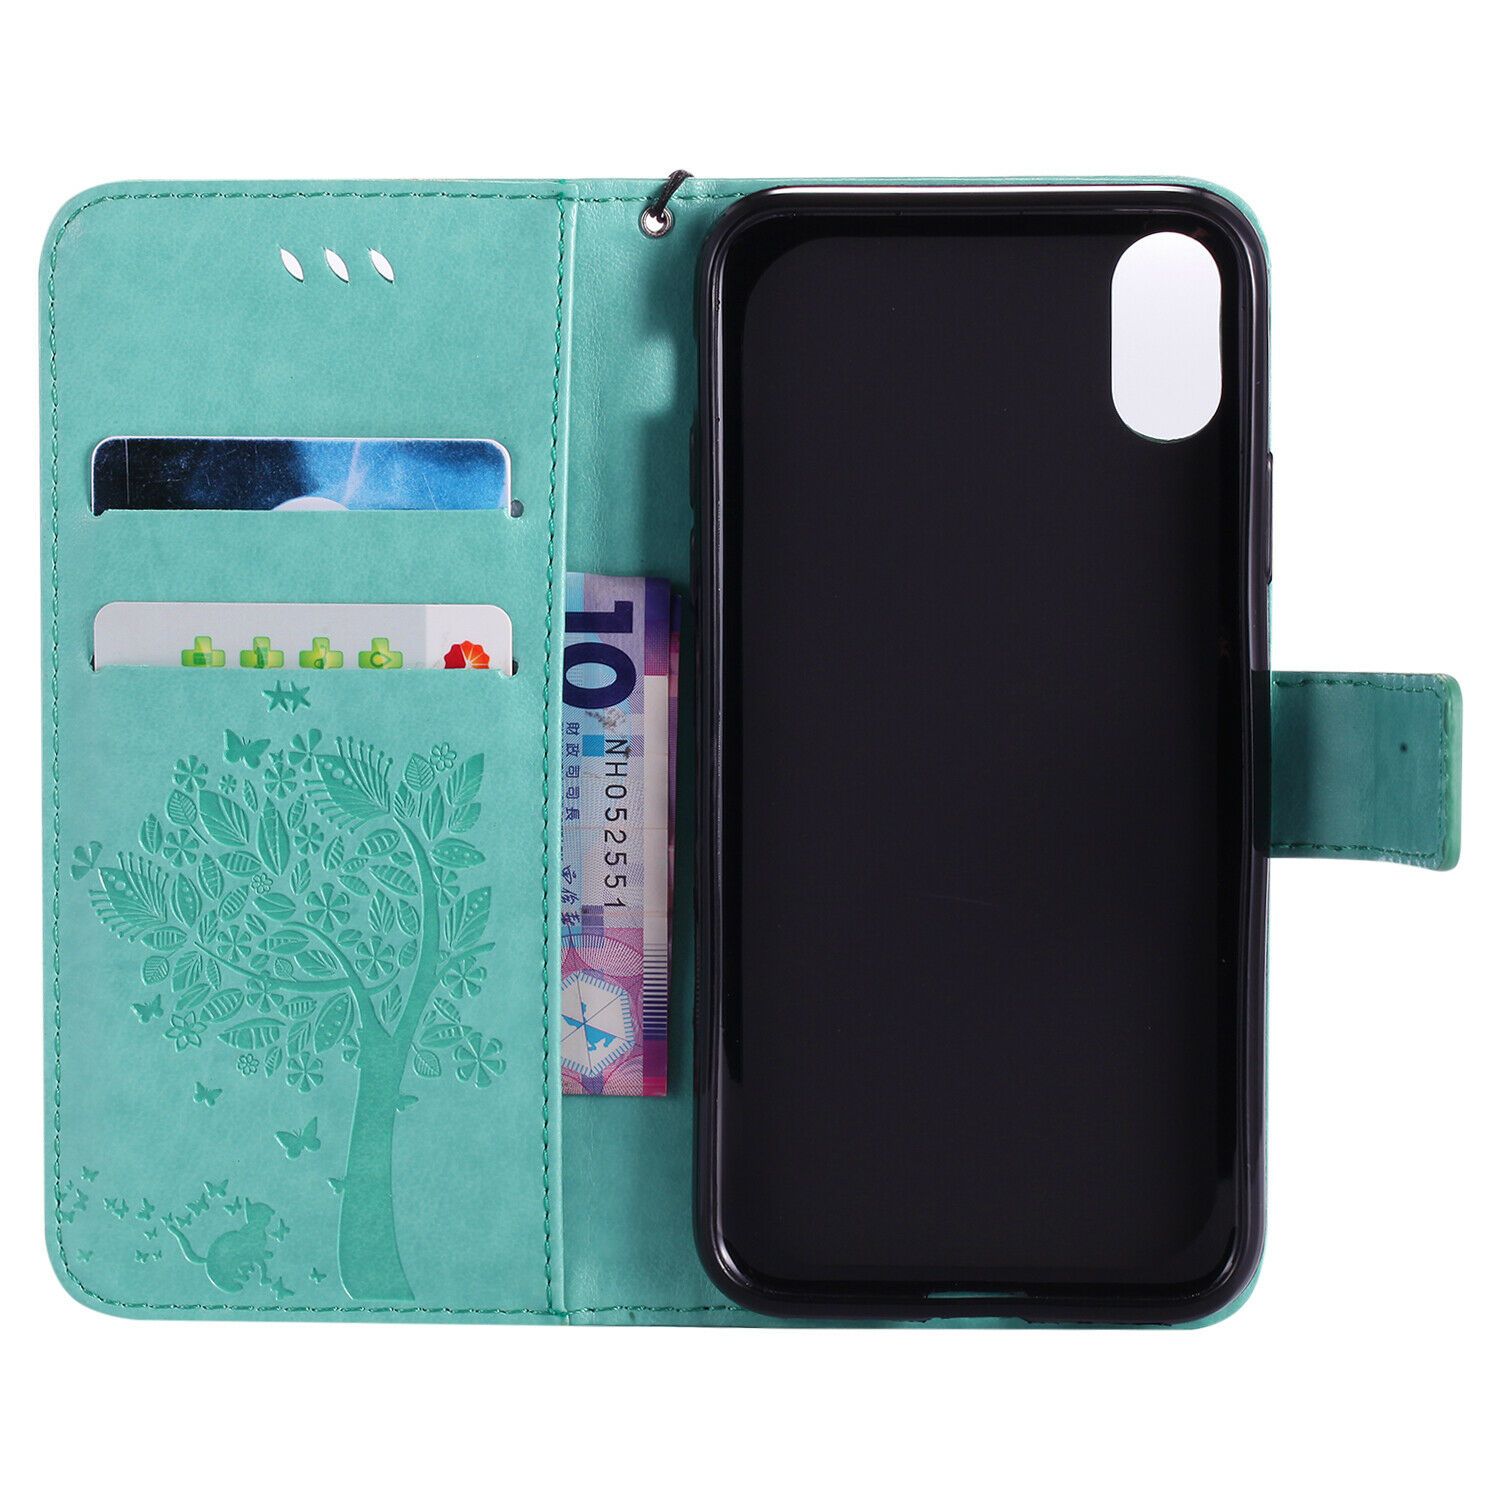 Magnetic Leather Wallet Case For iPhone 8 7 6s Plus X XS MAX XR Flip Cover Stand stekim-92 